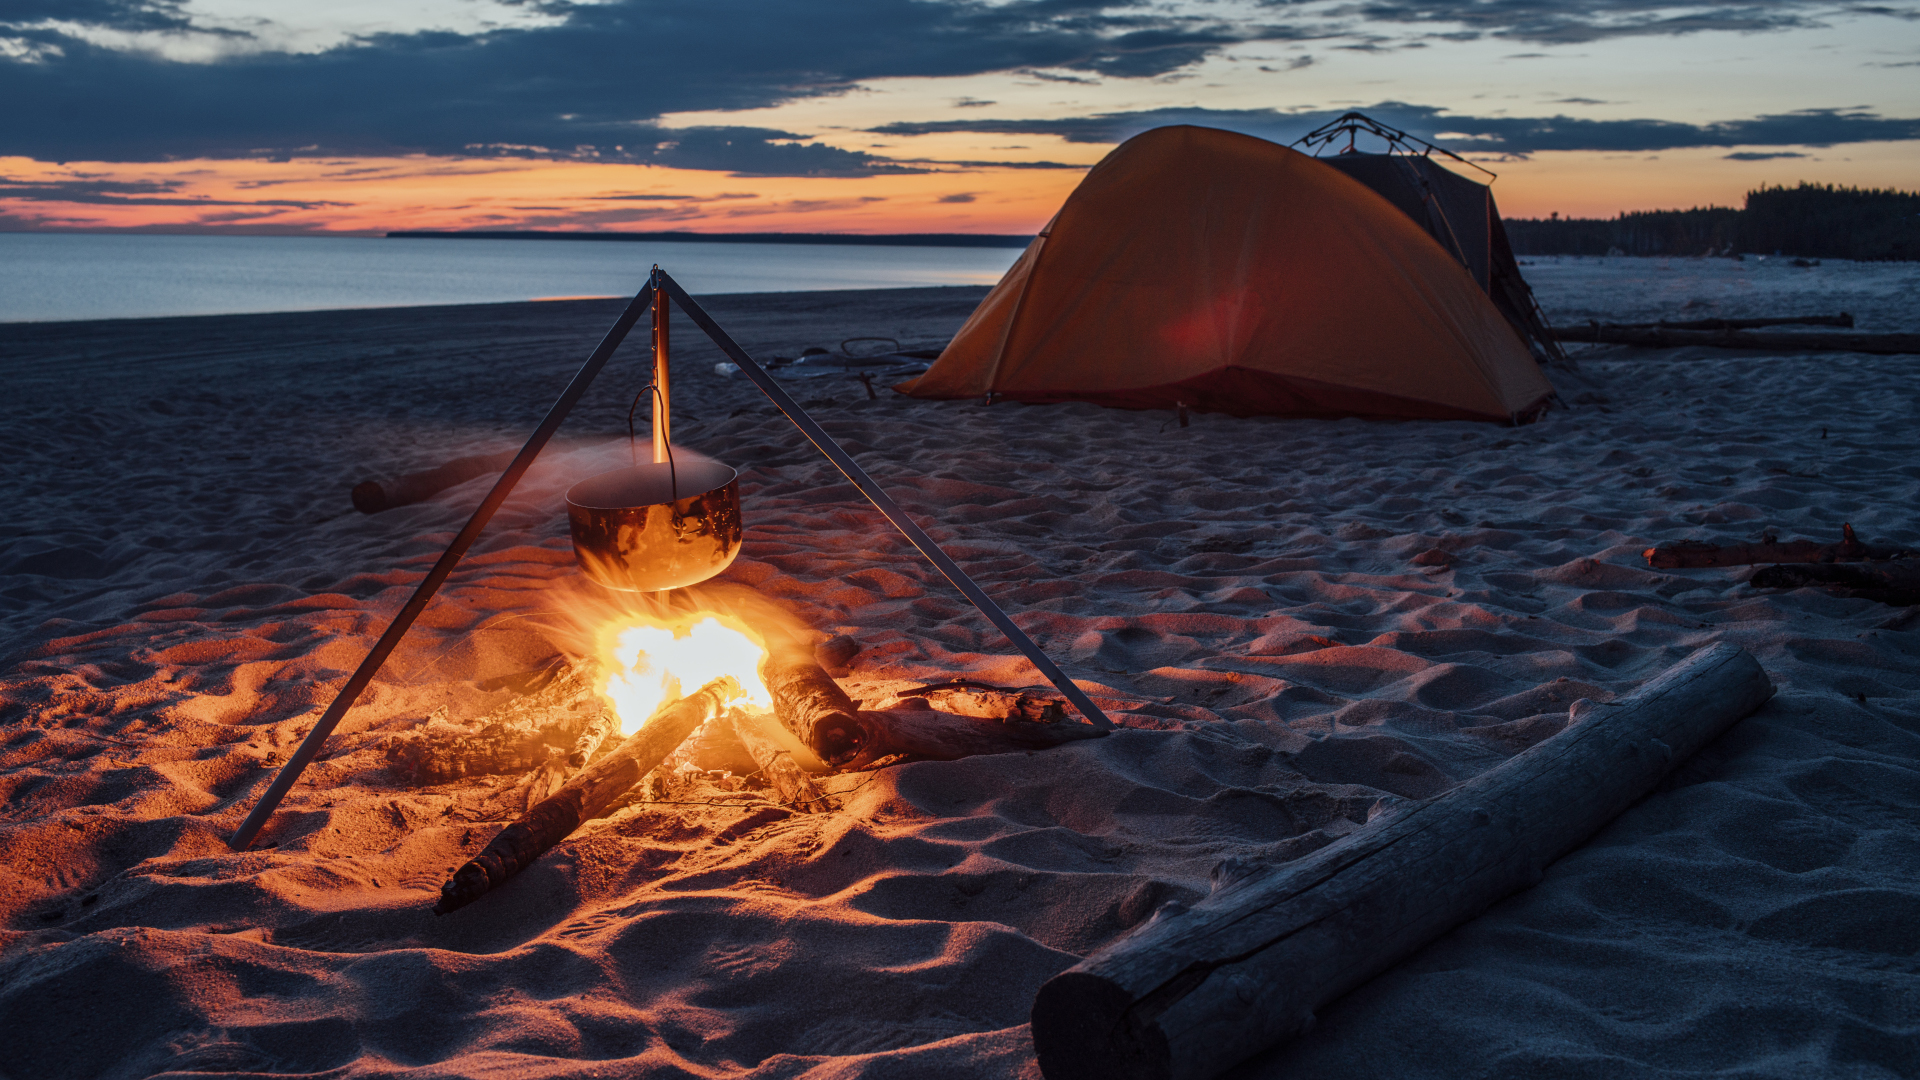 How To Build A Campfire On The Beach